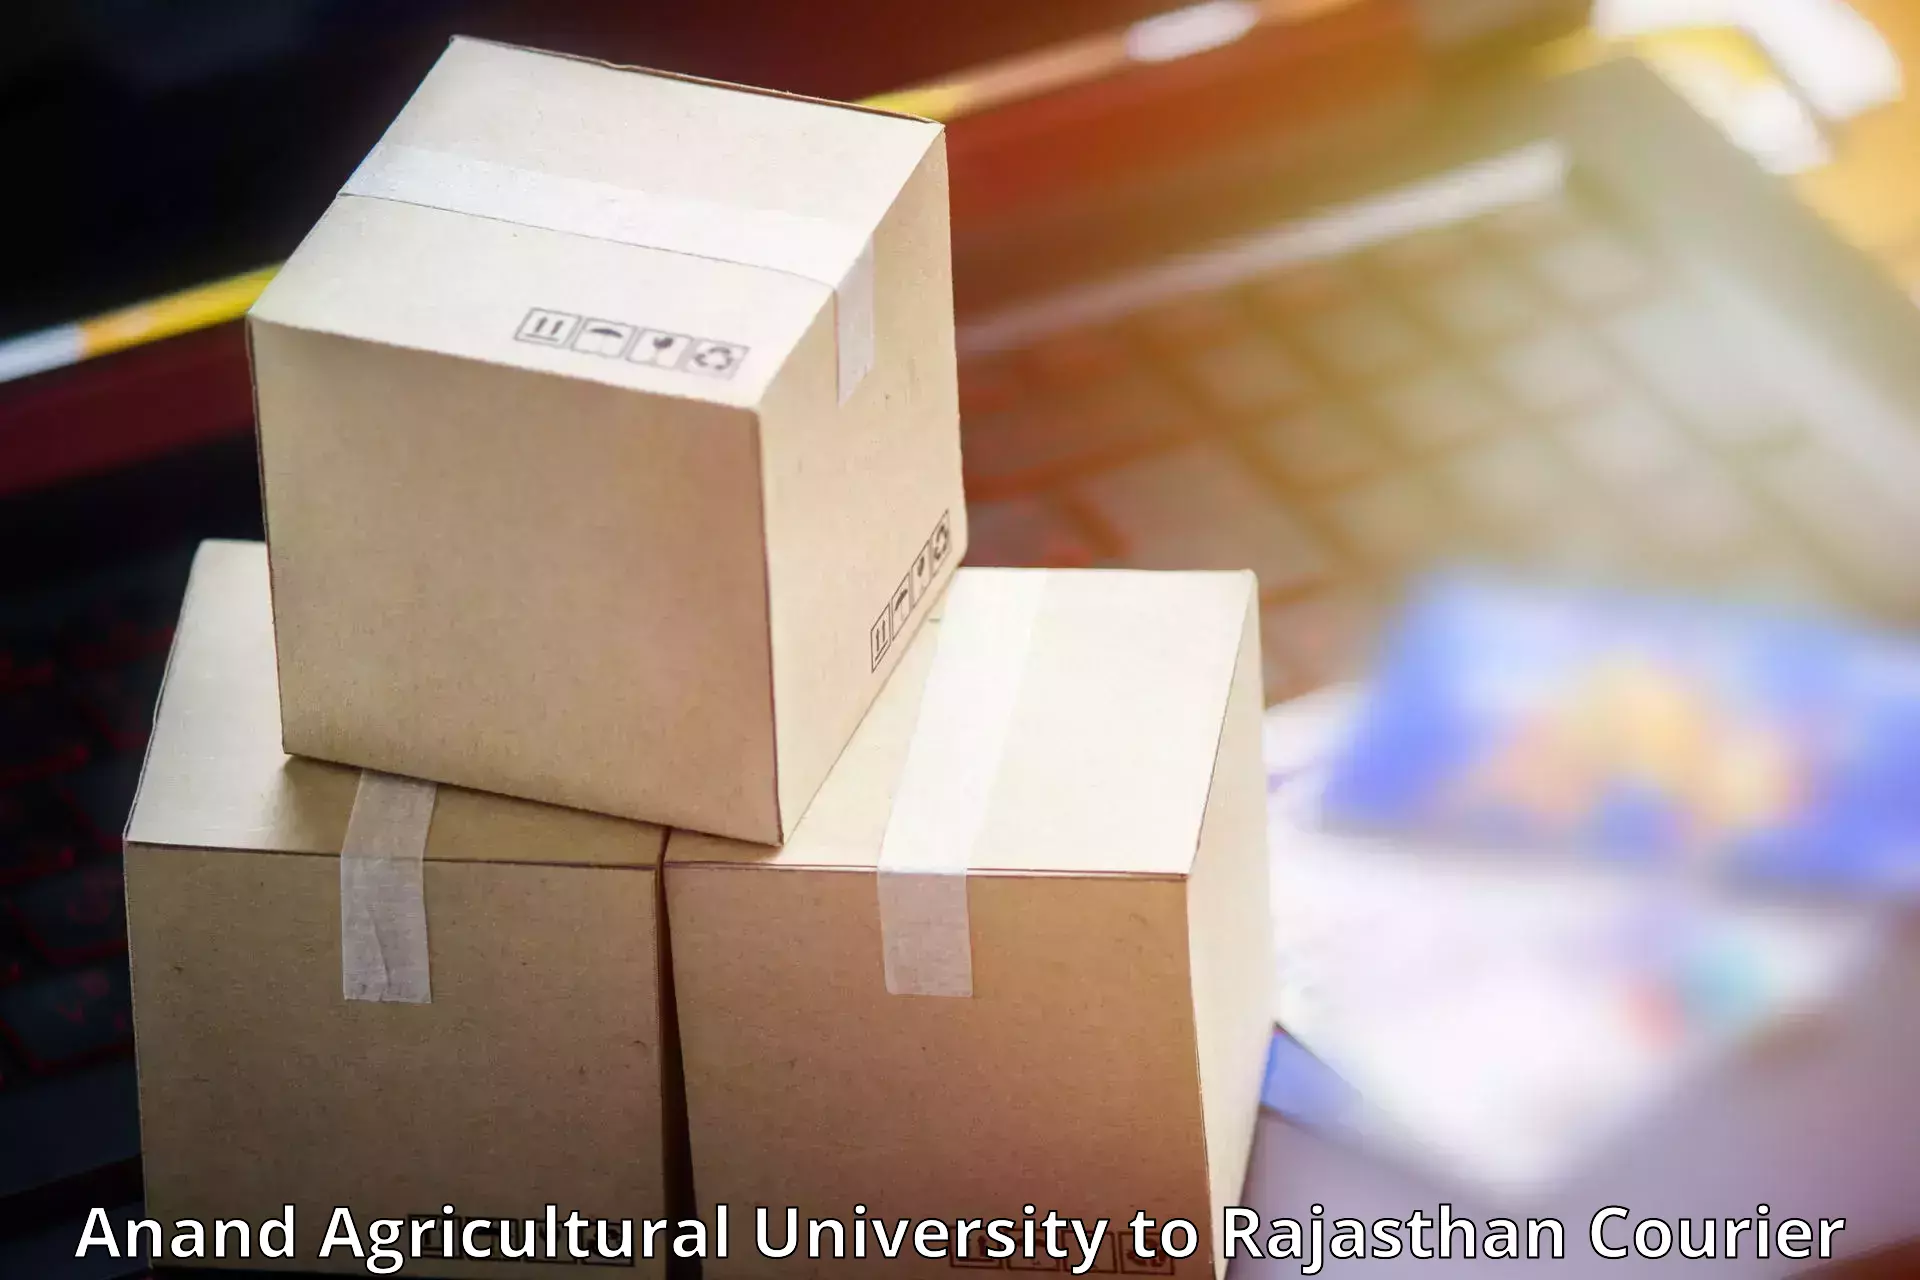 High-quality delivery services Anand Agricultural University to Banar